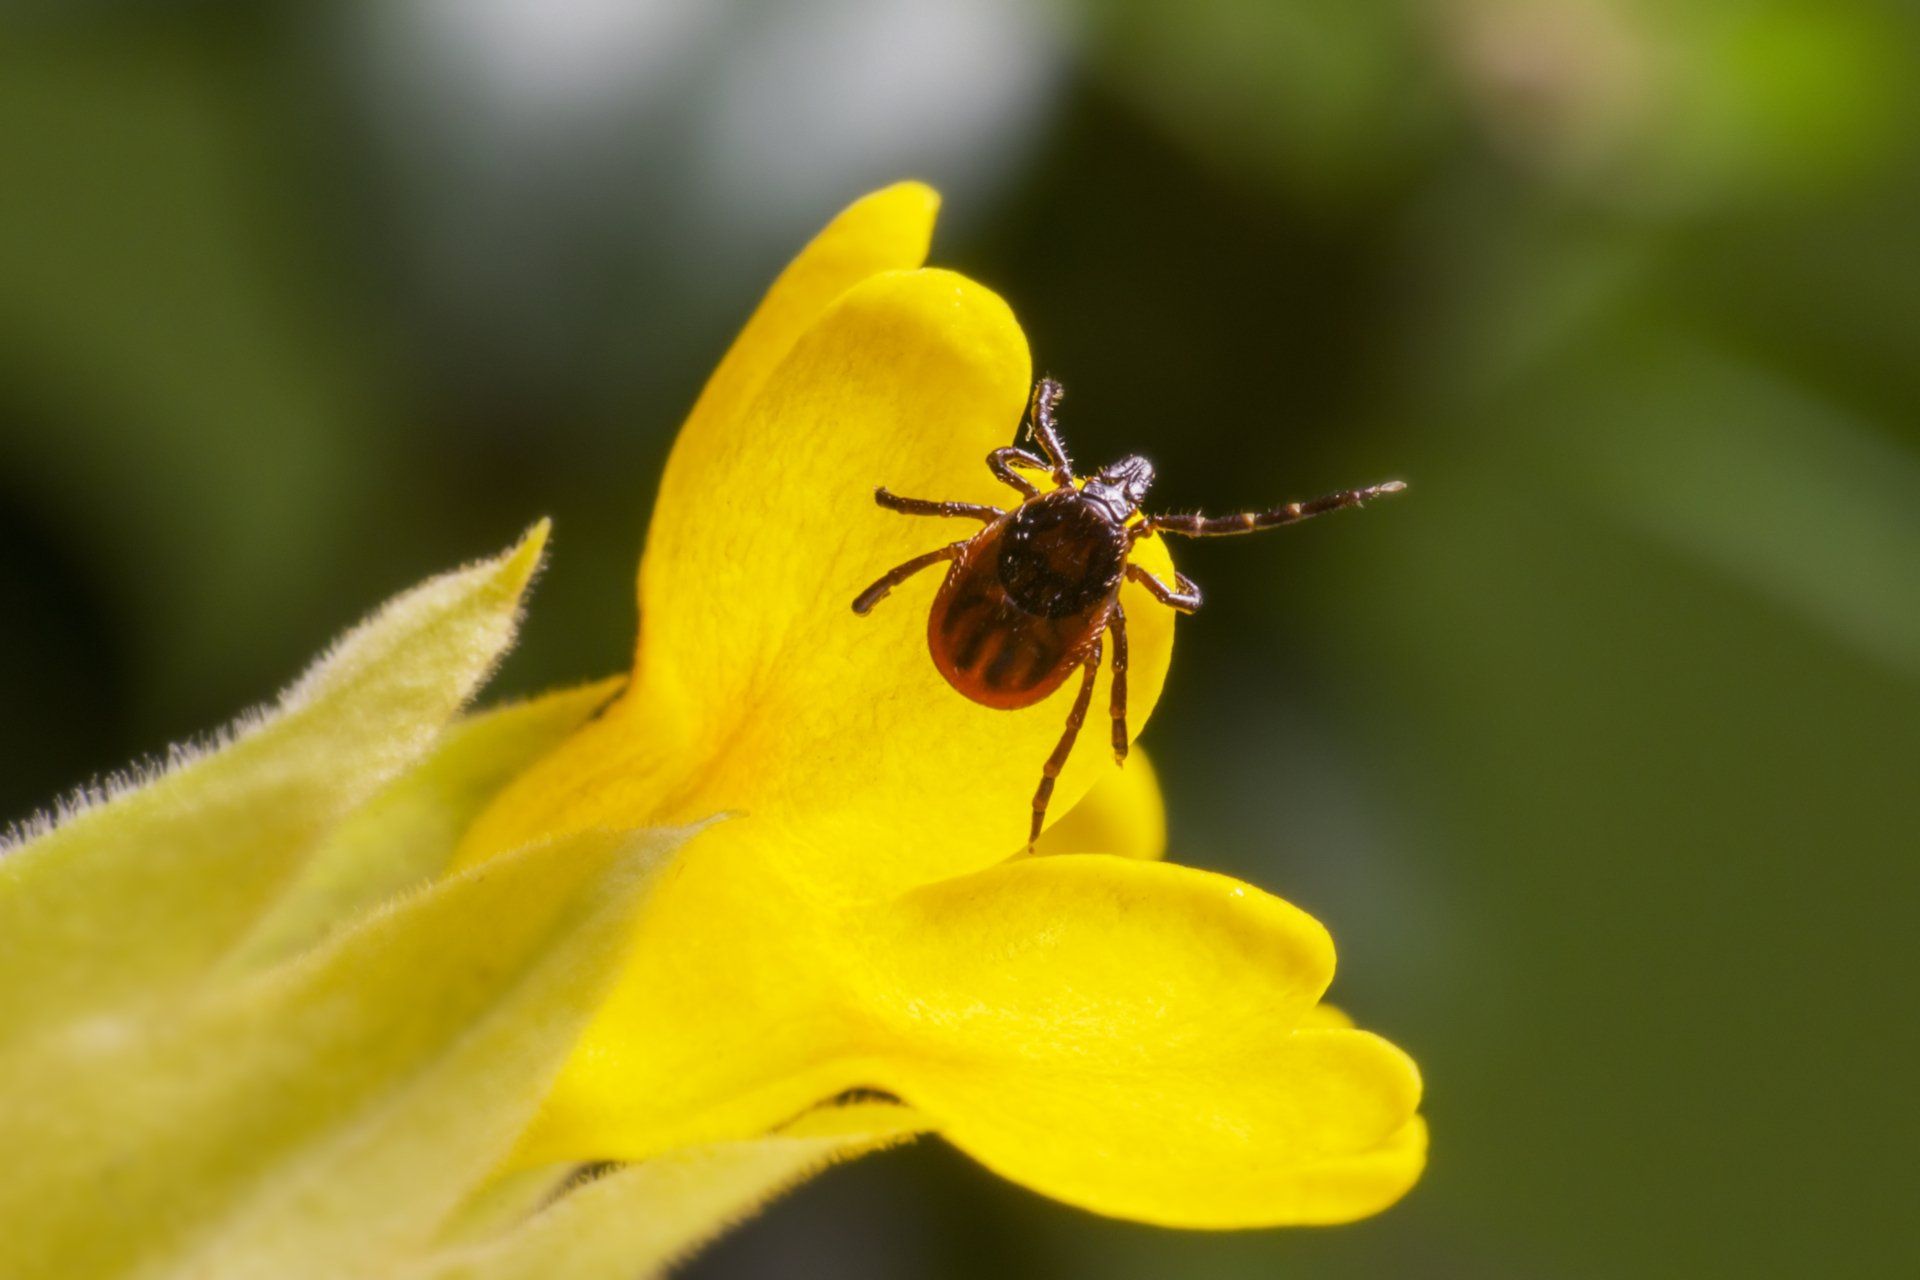 A close up of a tick on a yellow flower.